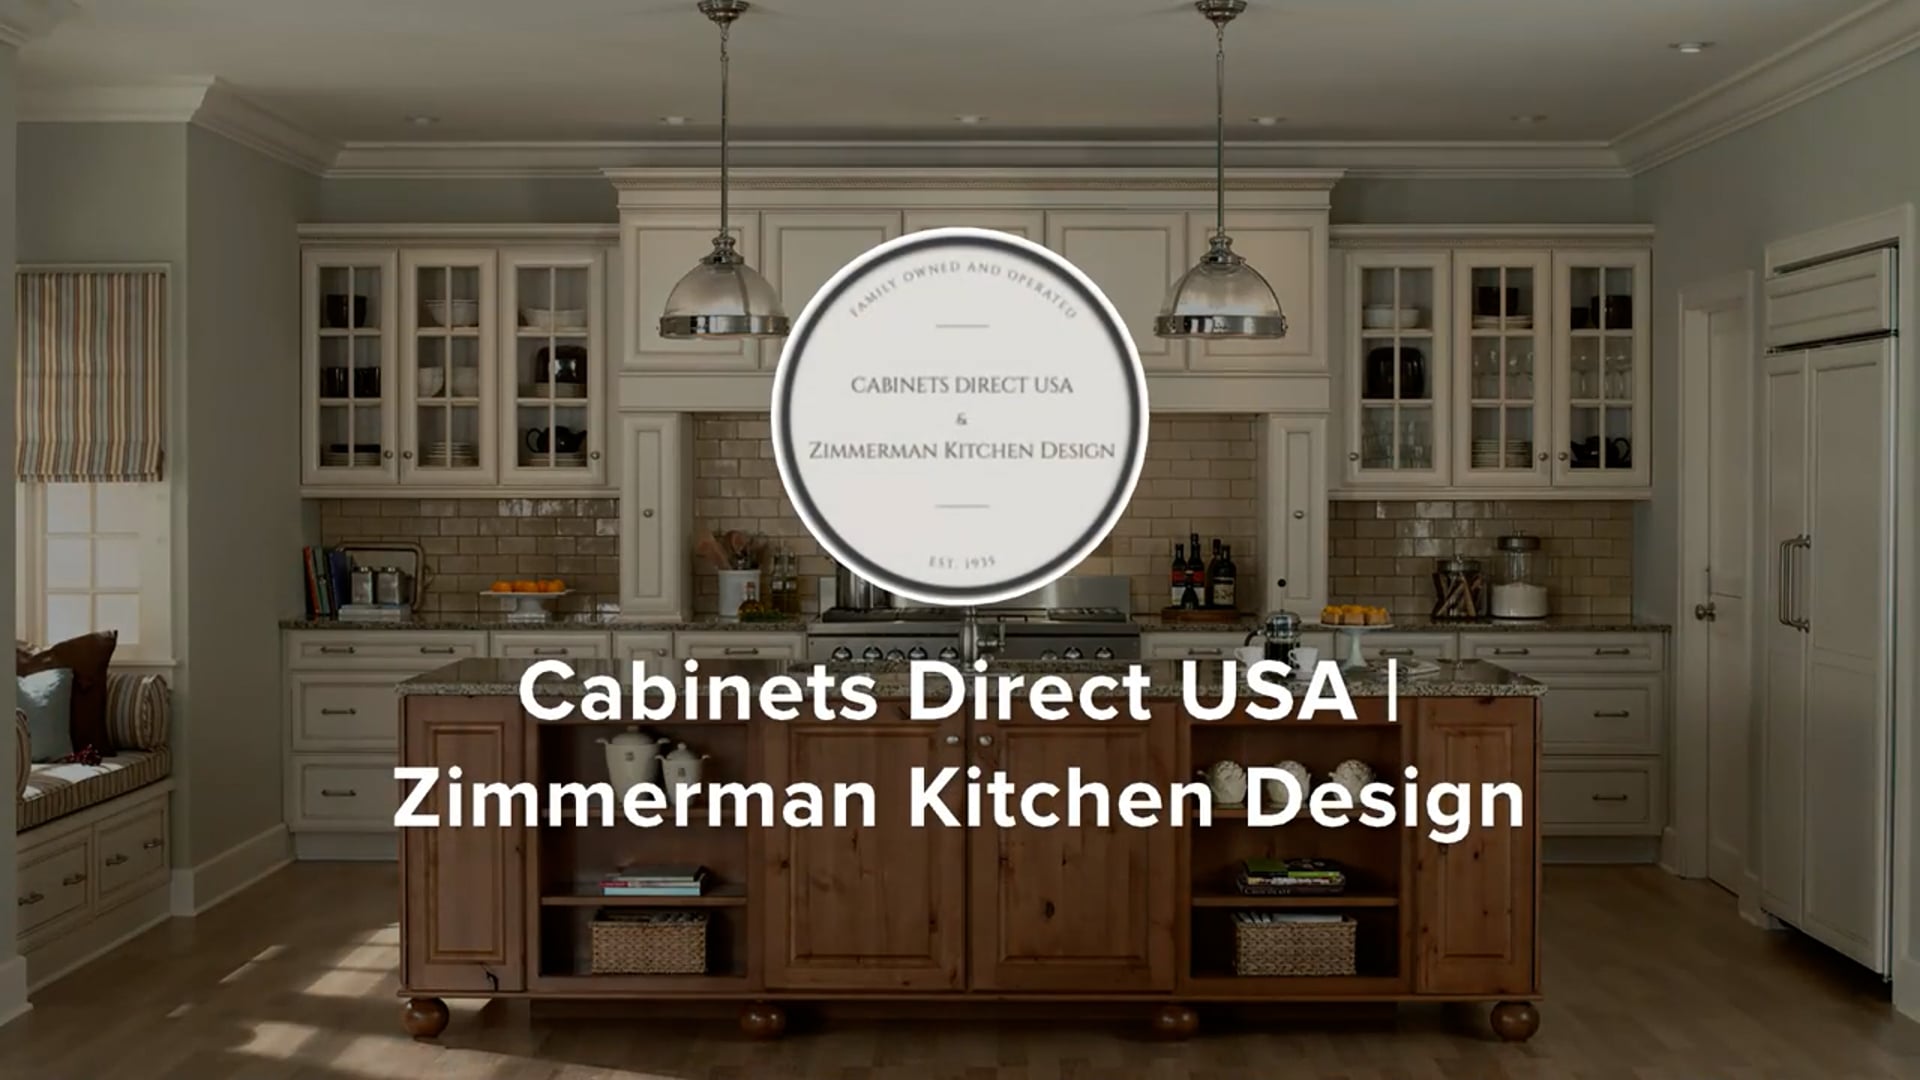 Custom Cabinets MN Cabinet Makers